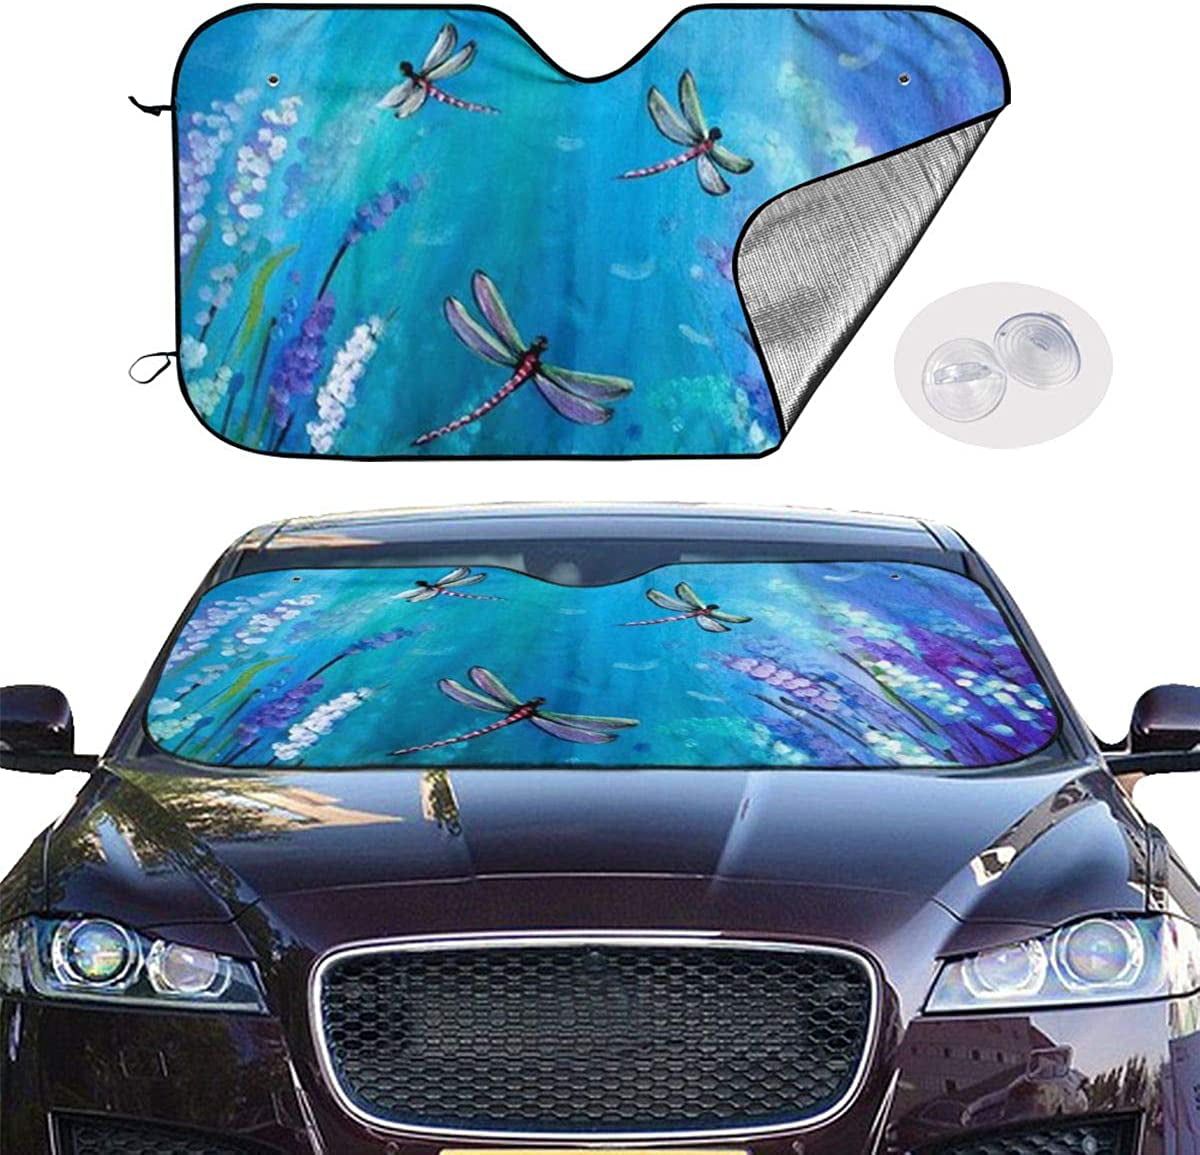 Standard 51 X 27 Inch Blocks Uv Rays Sun Visor Protector Steam Train And Railway Car Windshield Sun Shade Easy To Use To Keep Your Vehicle Cool And Damage Free Fits Windshields Of Various Sizes